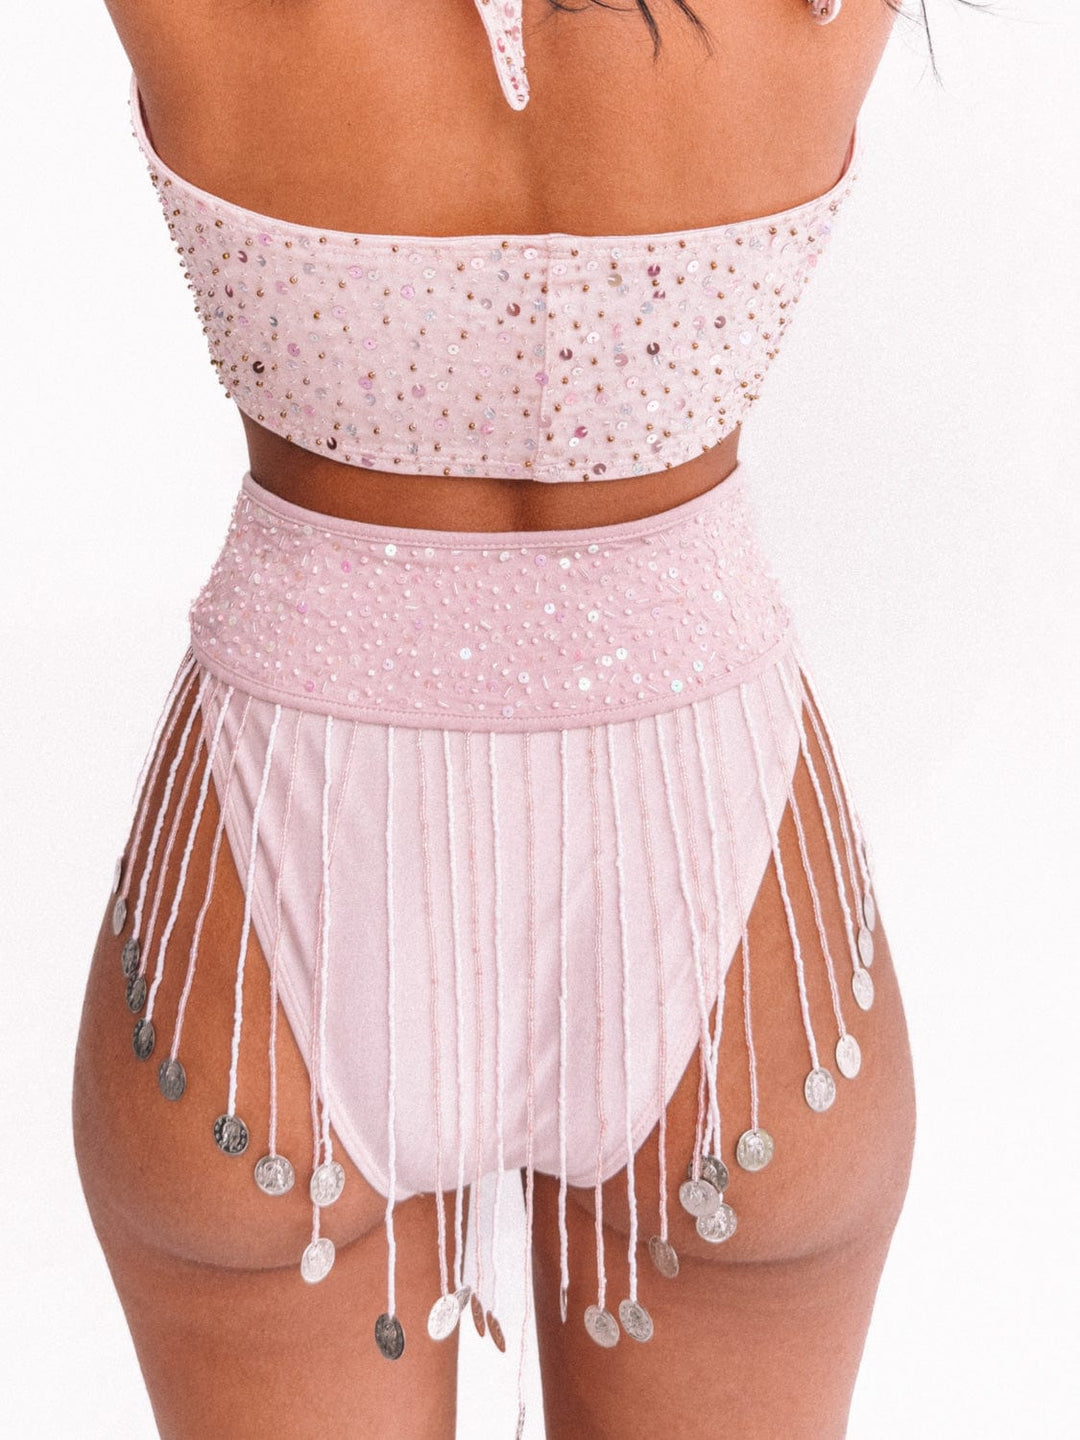 PRE-SALE / AMETHYST SEQUIN SPARKLE BLOOMERS - PINK - Her Pony